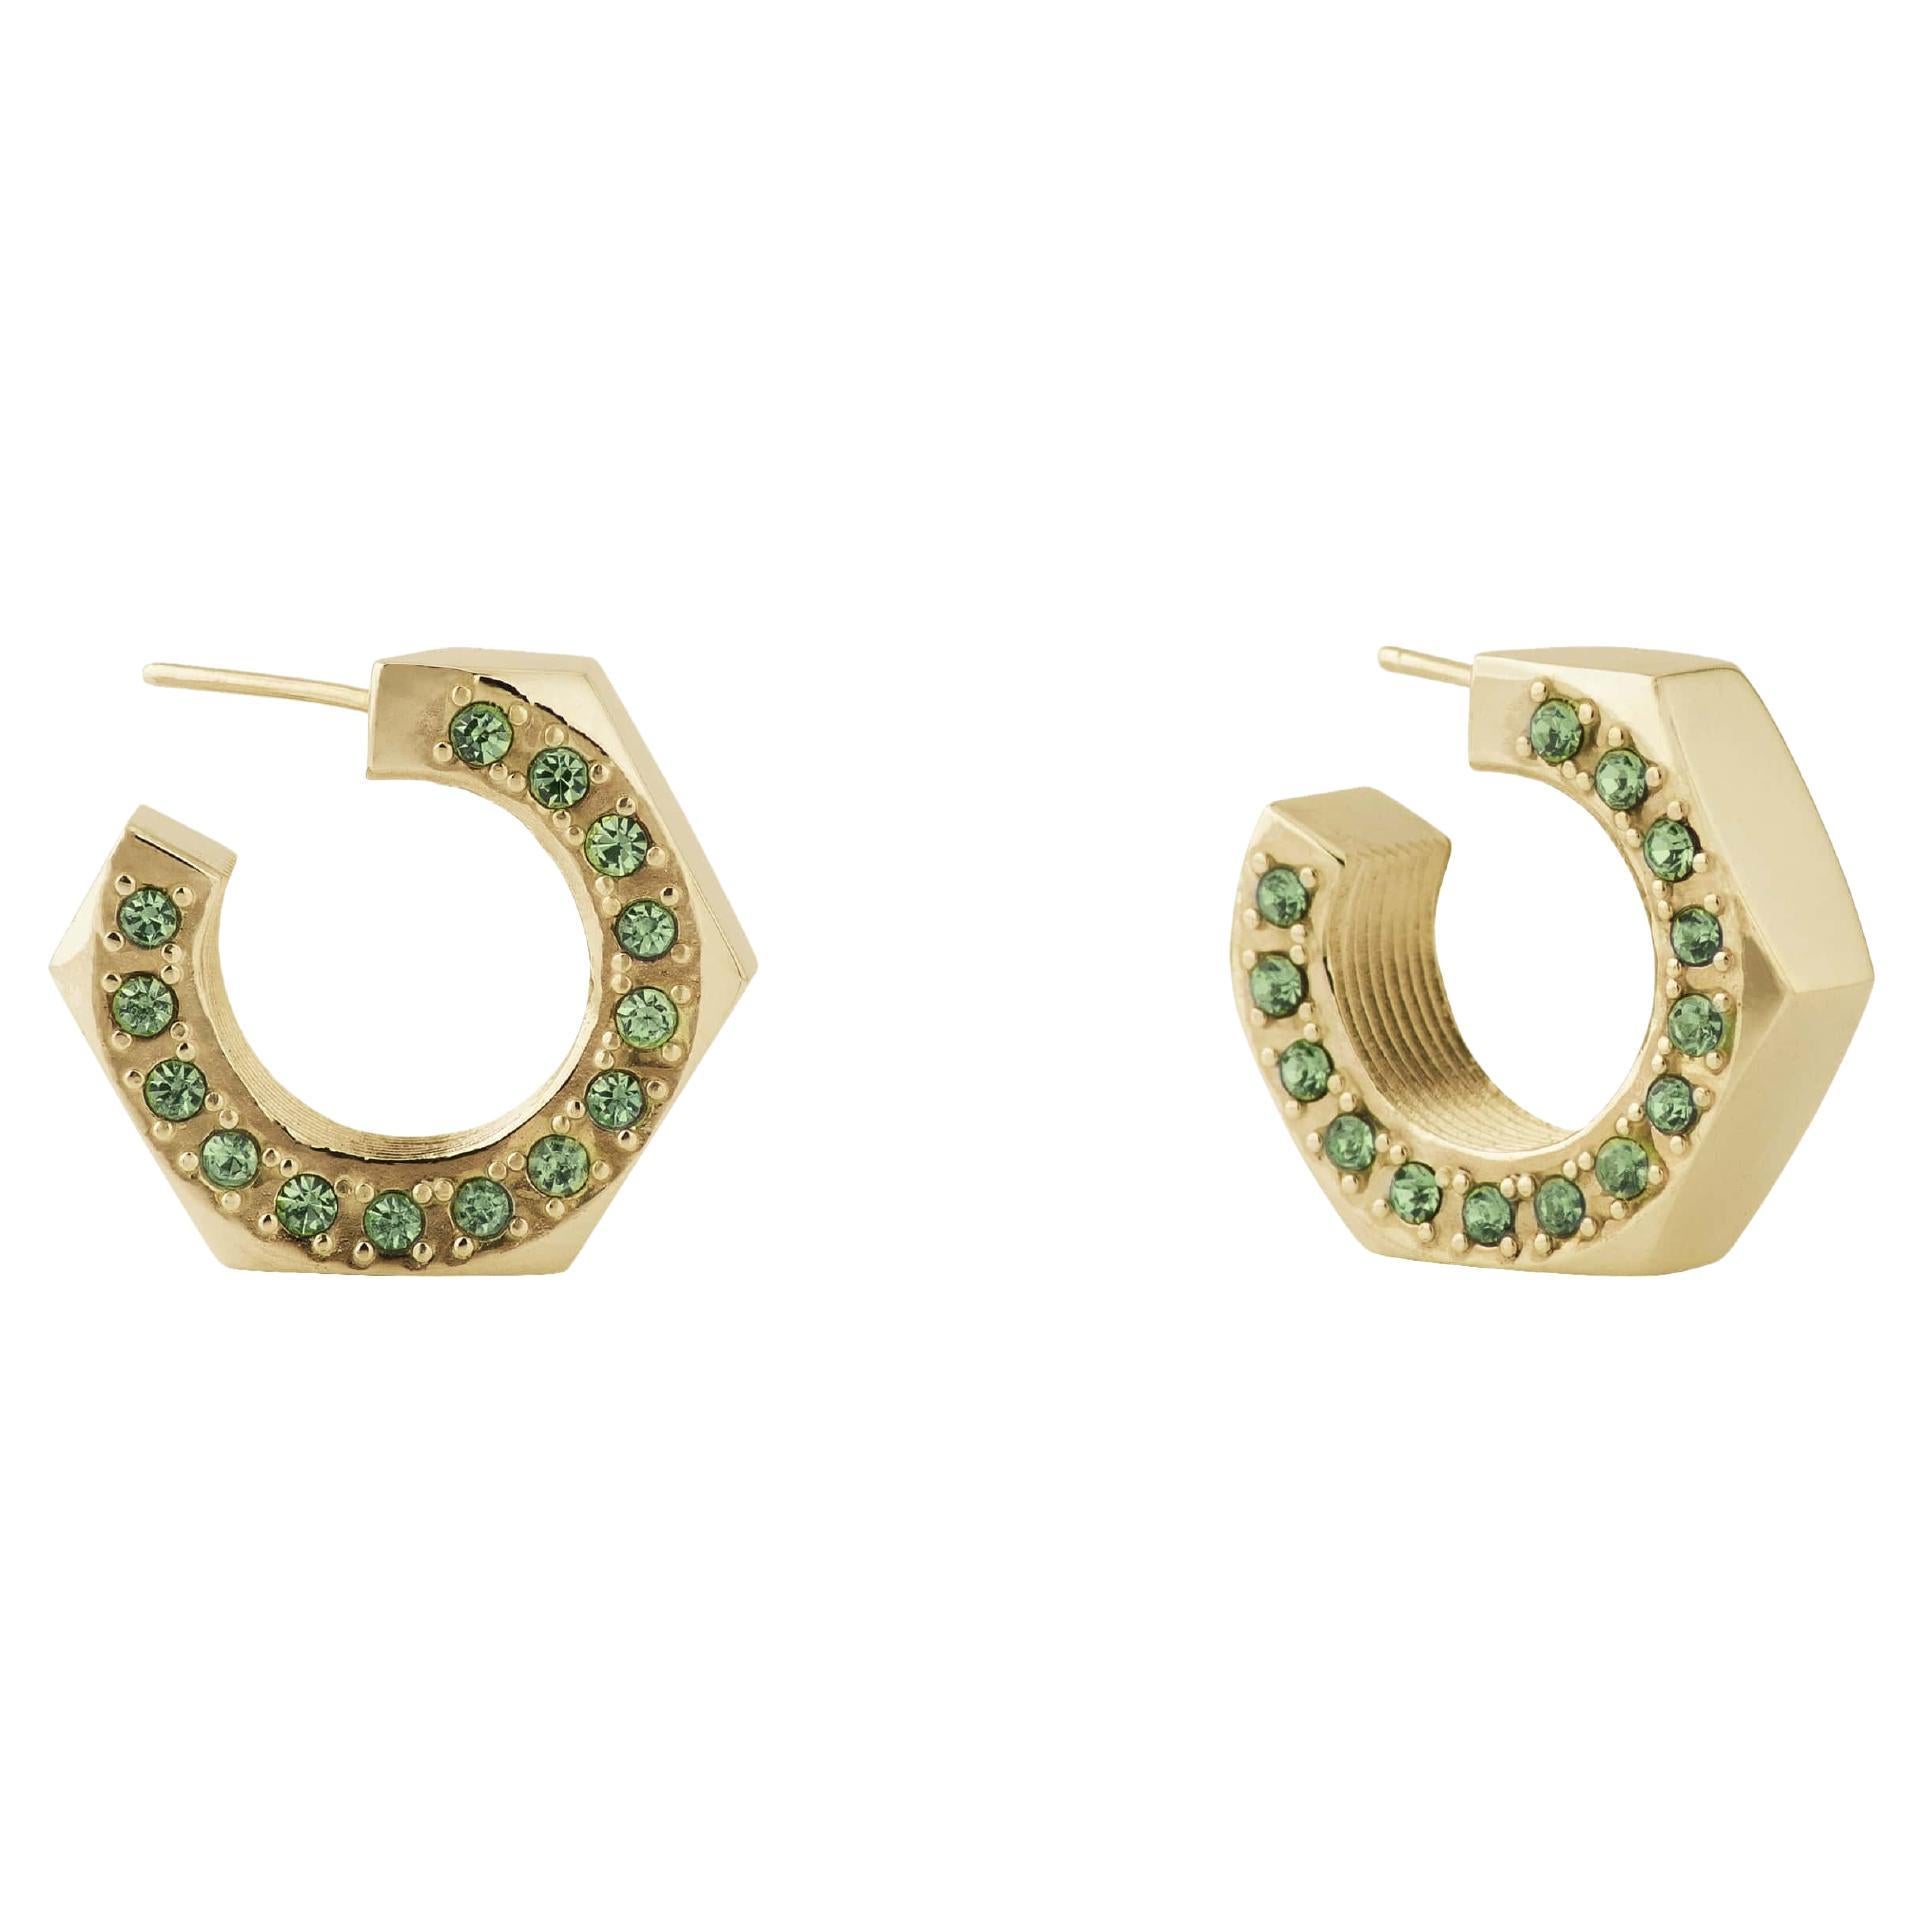 Big Gold Plated Silver Hoop Earrings with Natural Peridot Stones on the Side